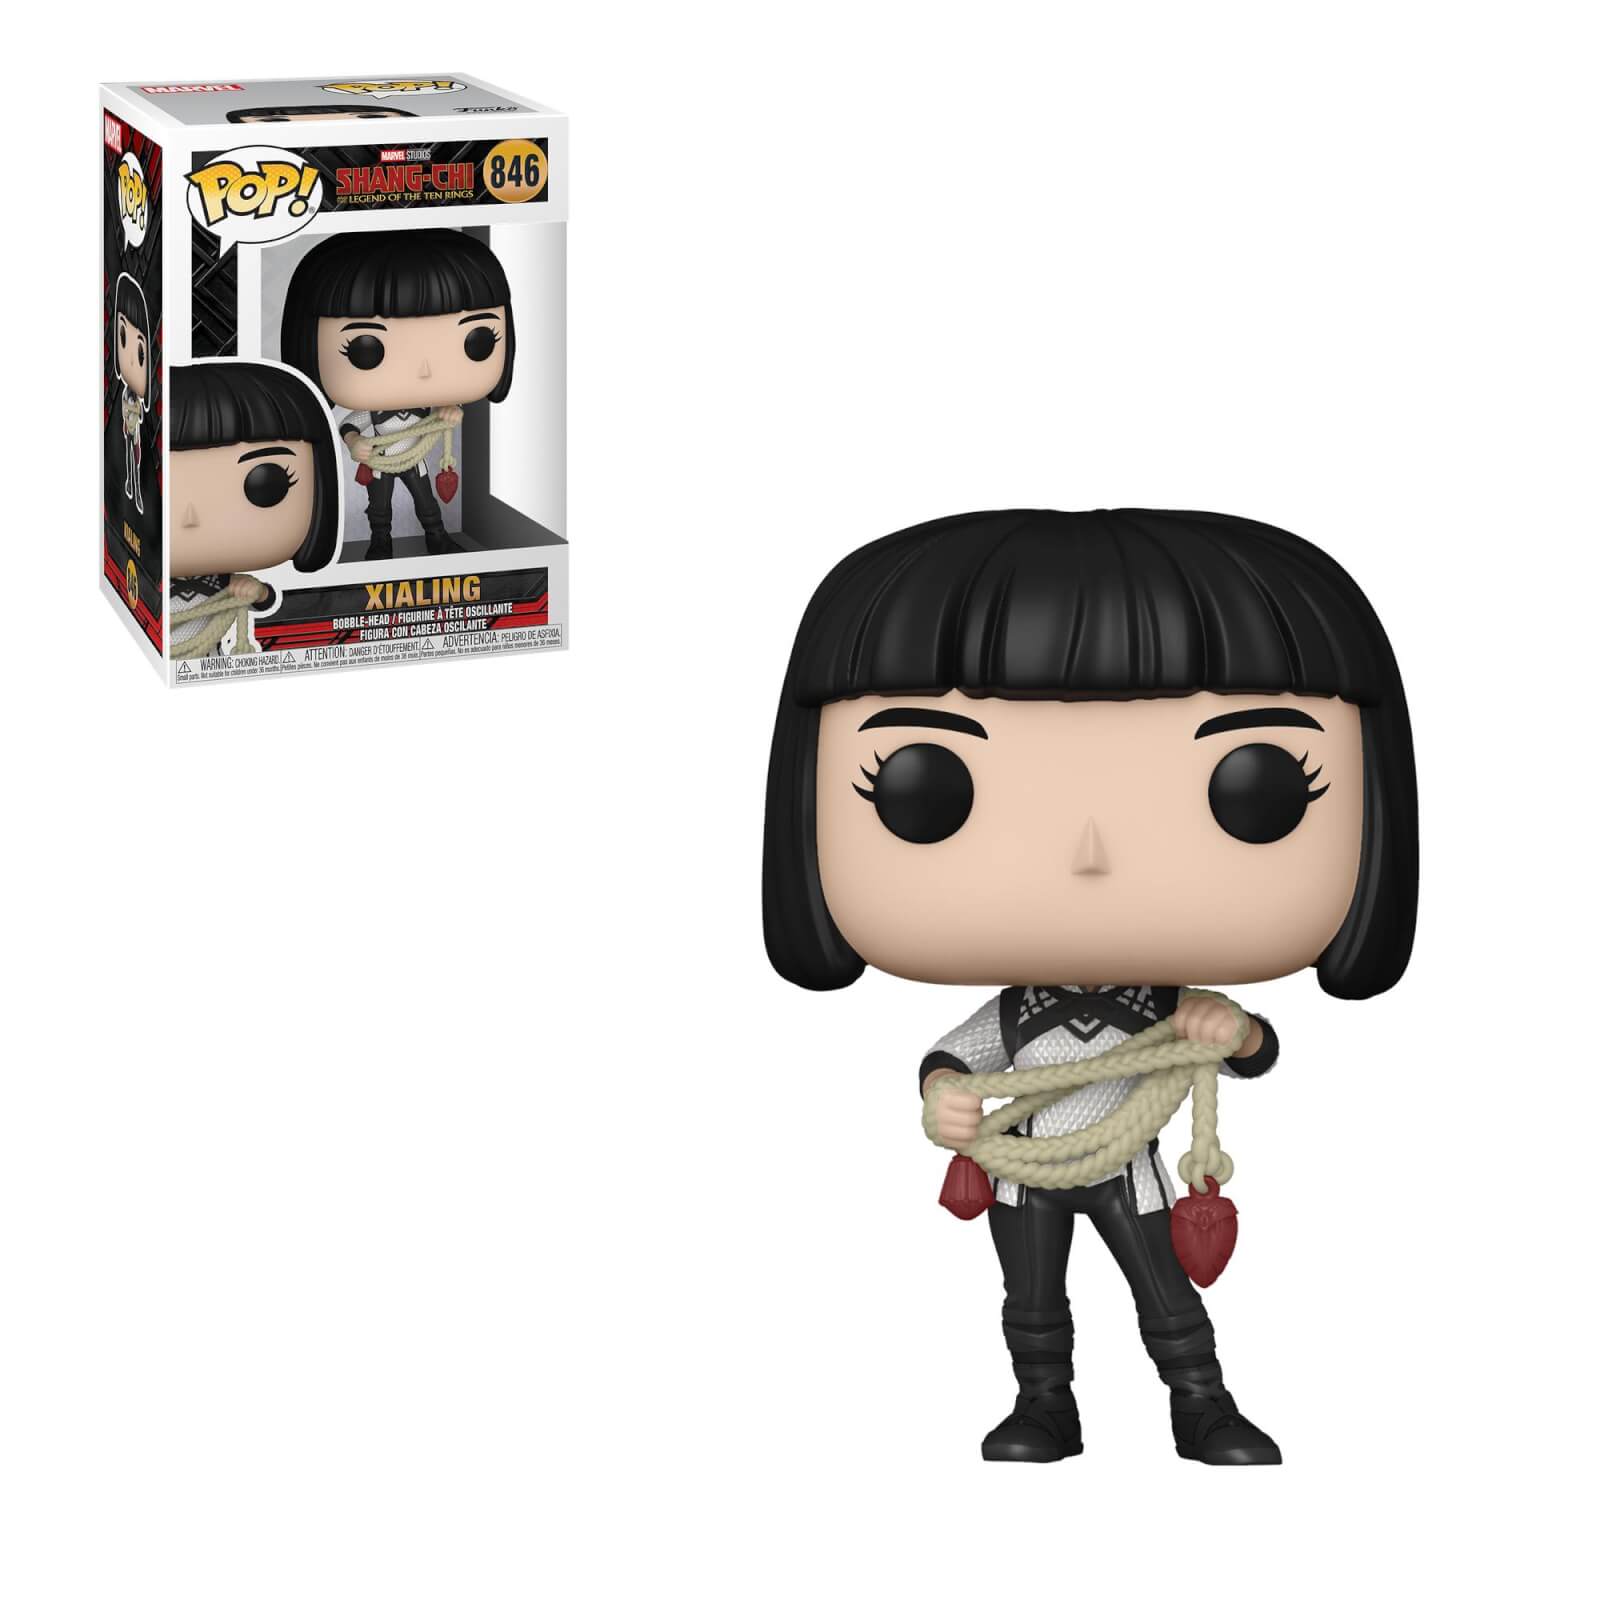 Marvel Shang Chi And The Legend Of The Ten Rings Xialing Funko Pop! Vinyl